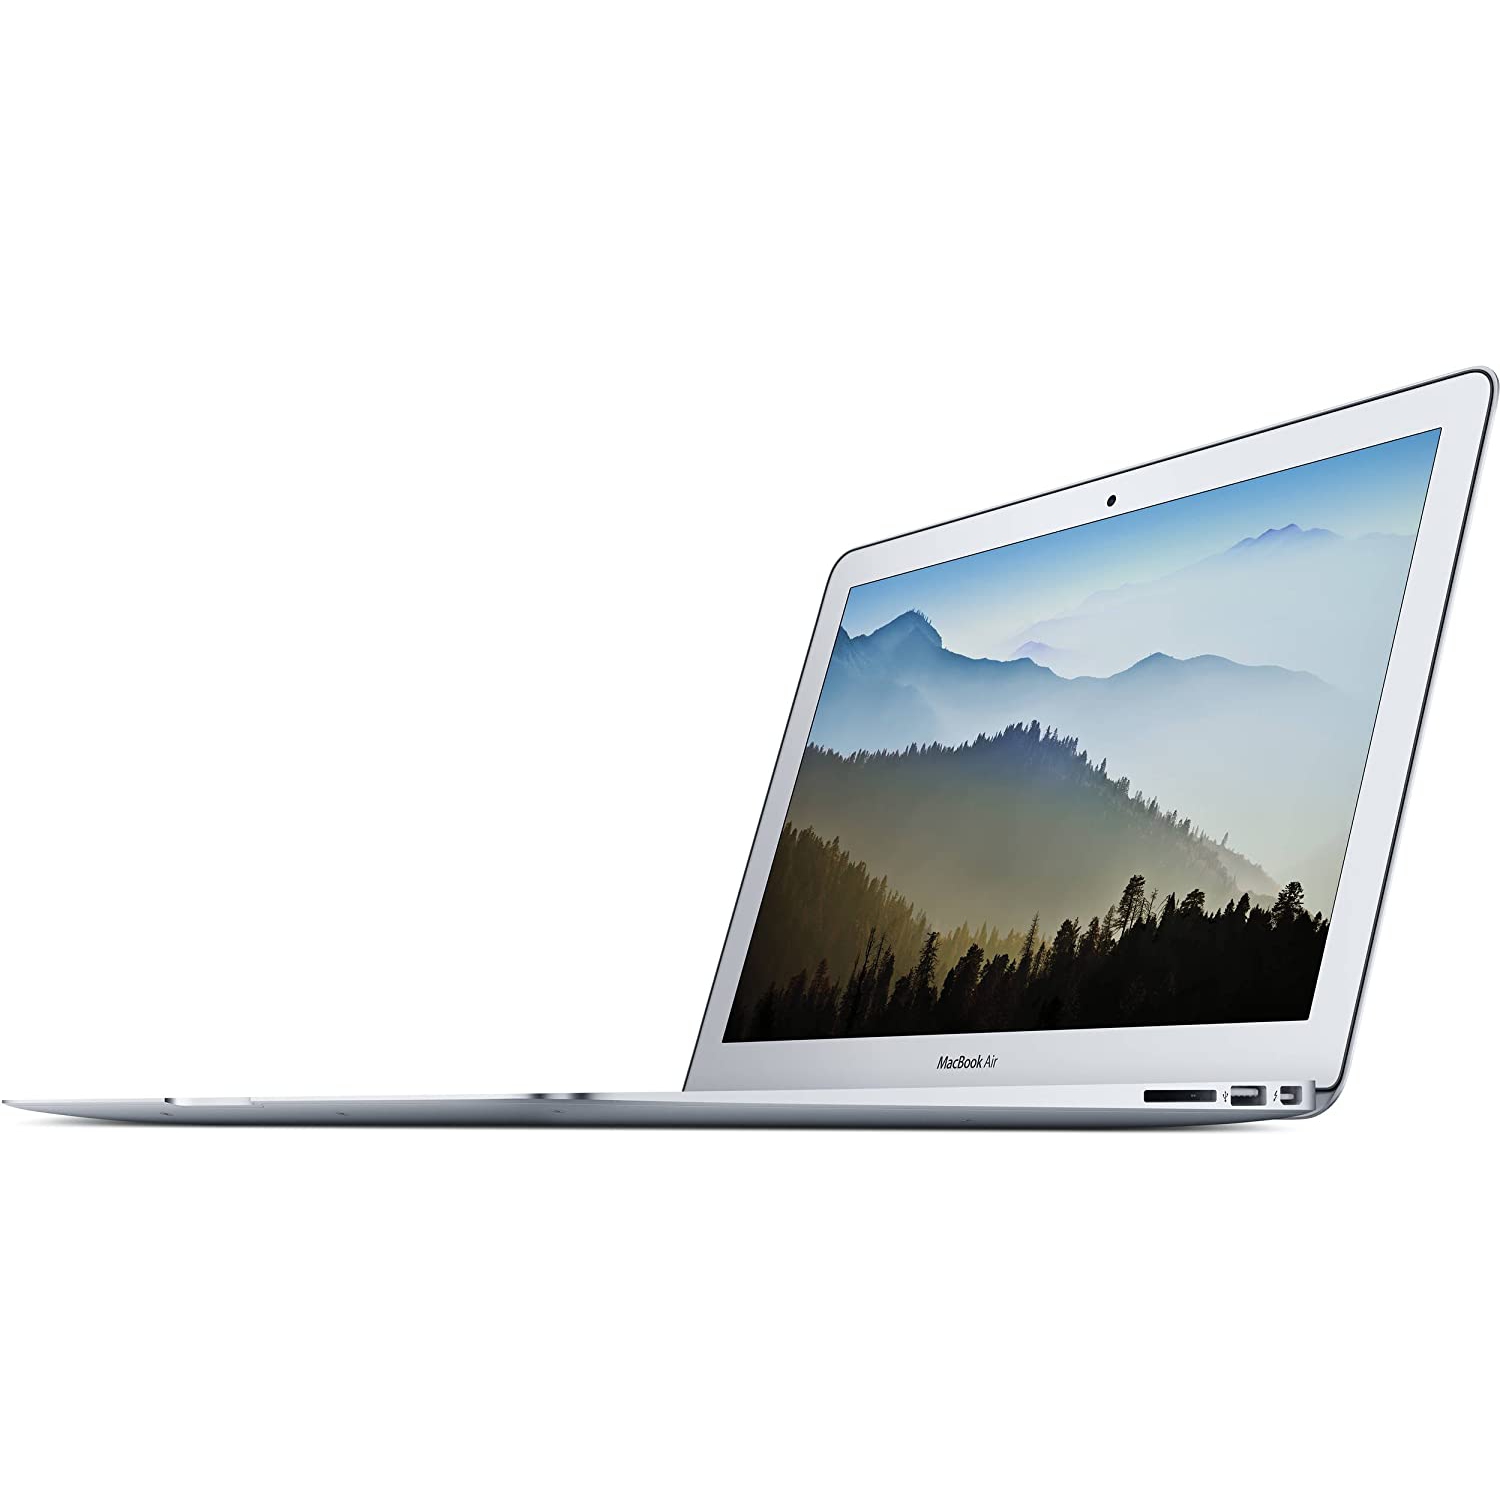 Refurbished (Excellent) - Apple 13in MacBook Air, MQD32LL/A (2017